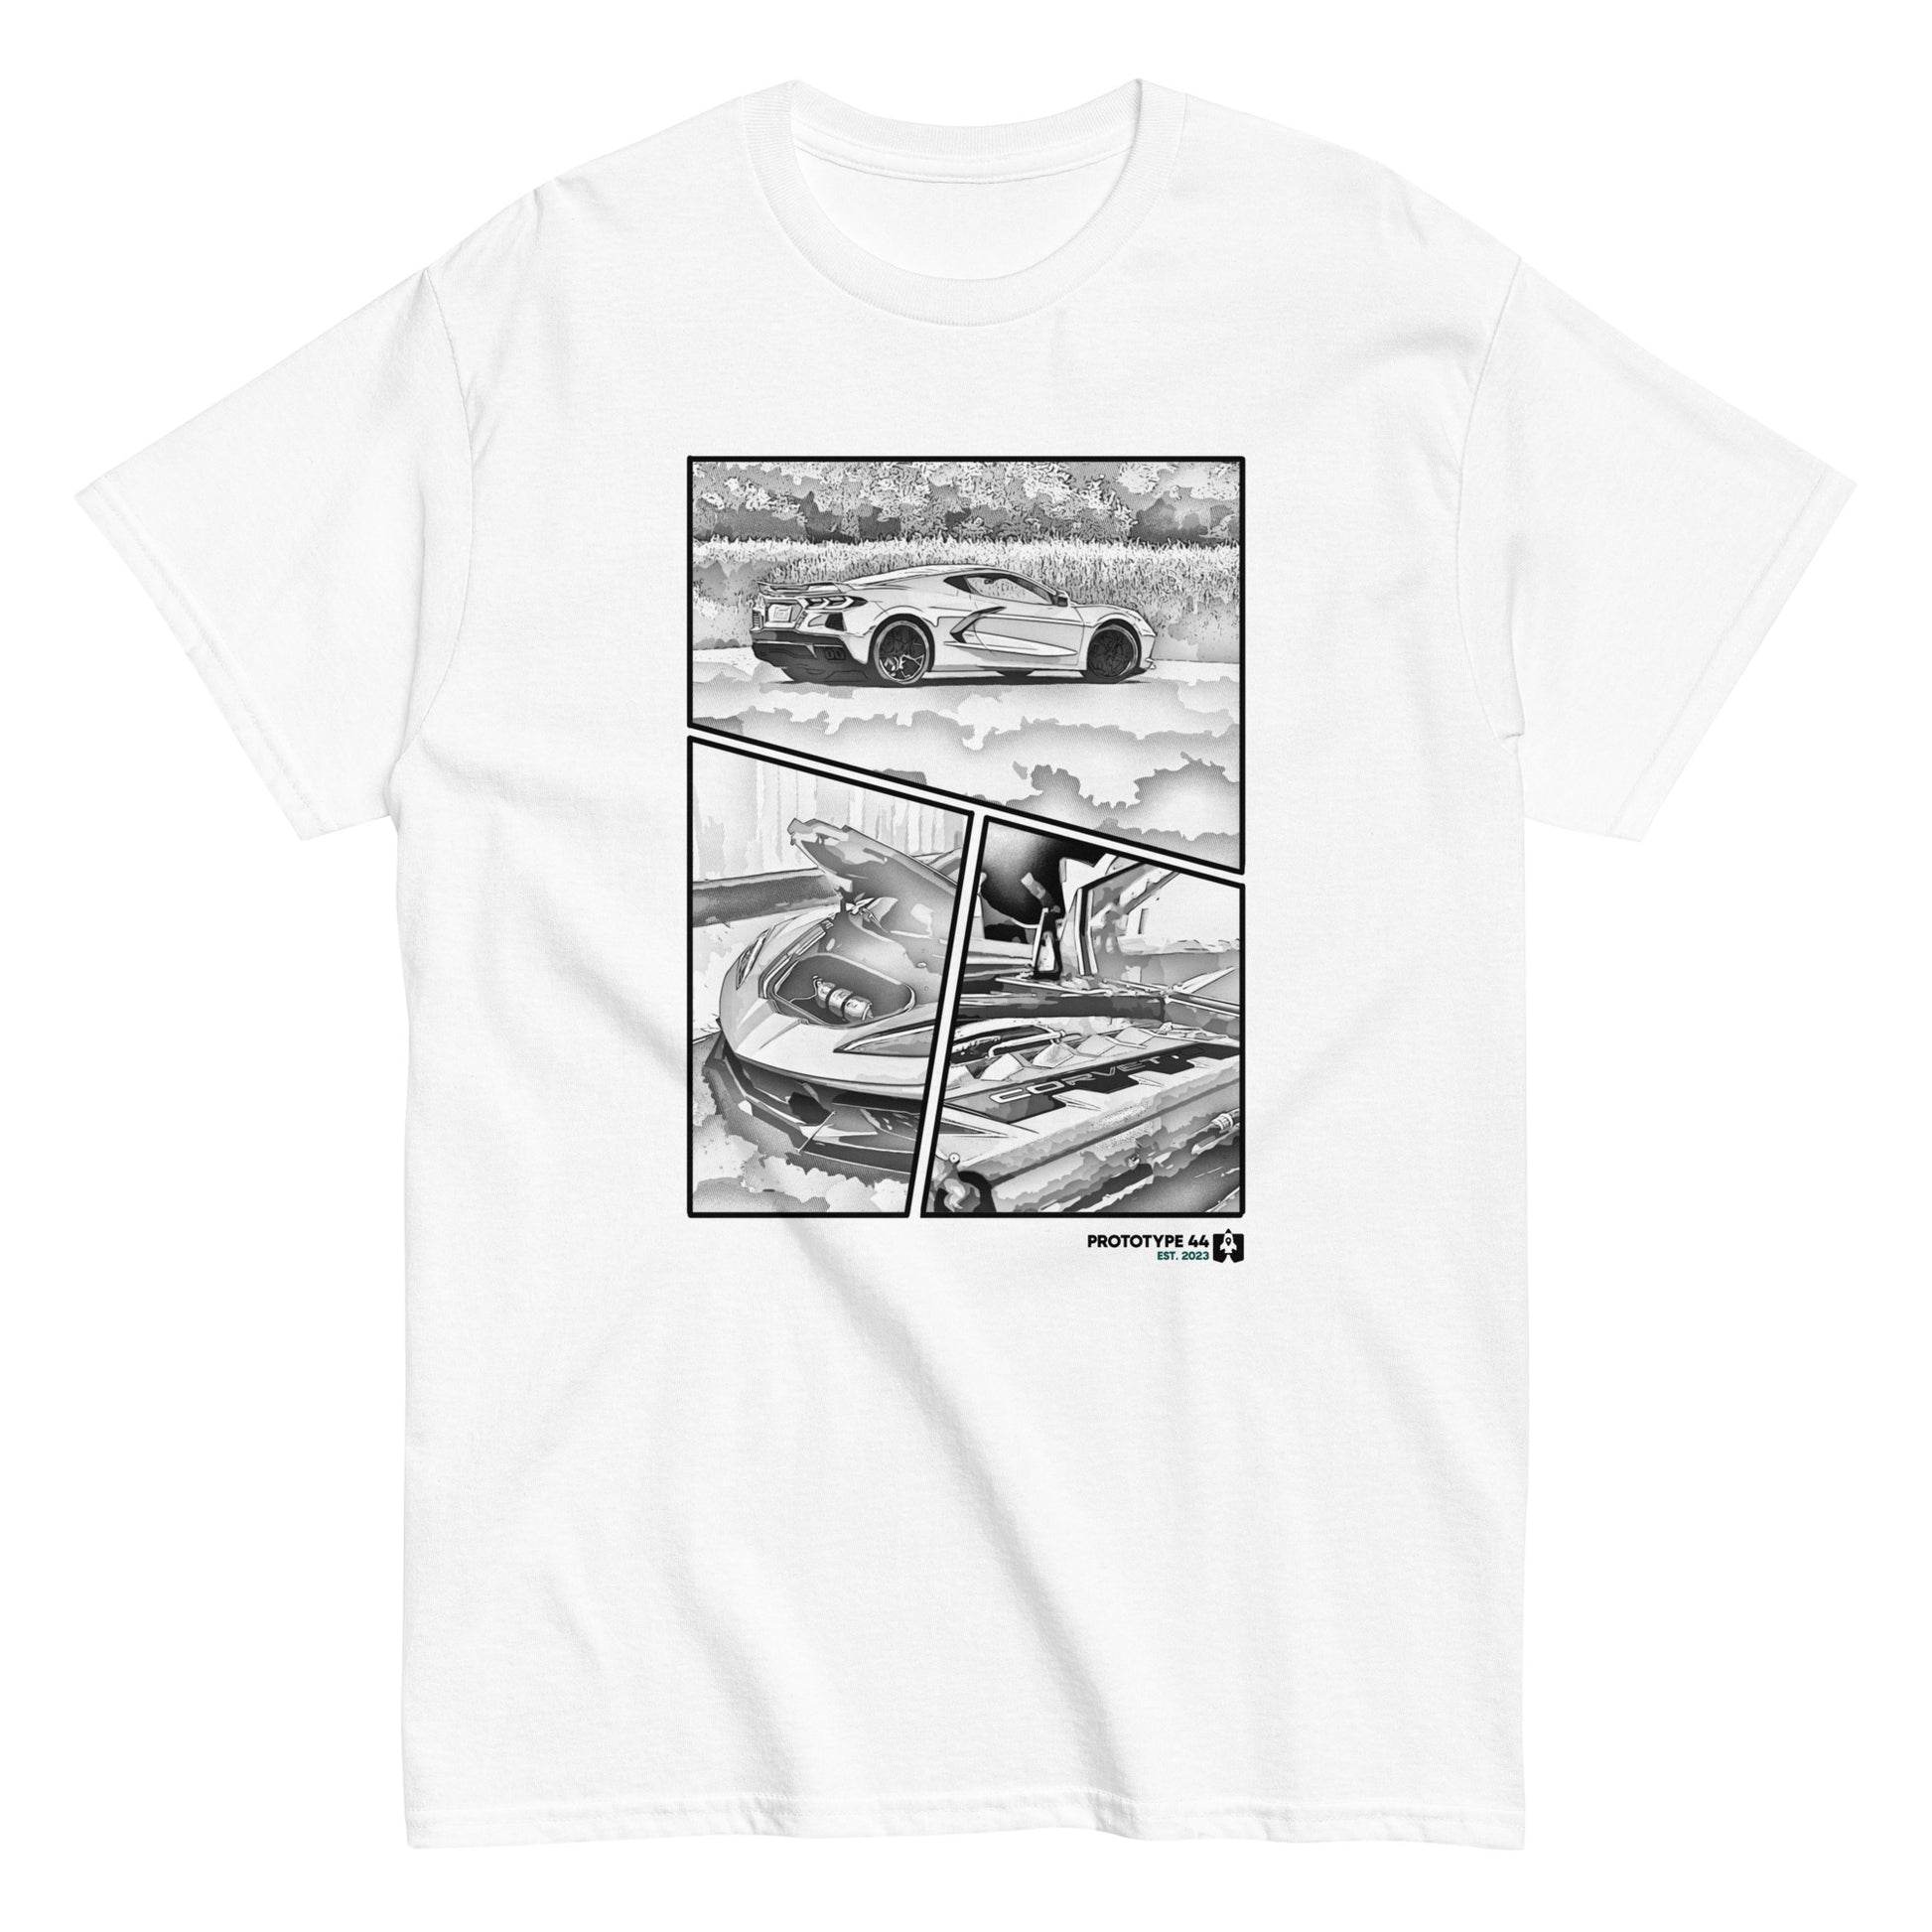 t-shirt with 3 panel manga, corvette side view, engine bay, frunk open